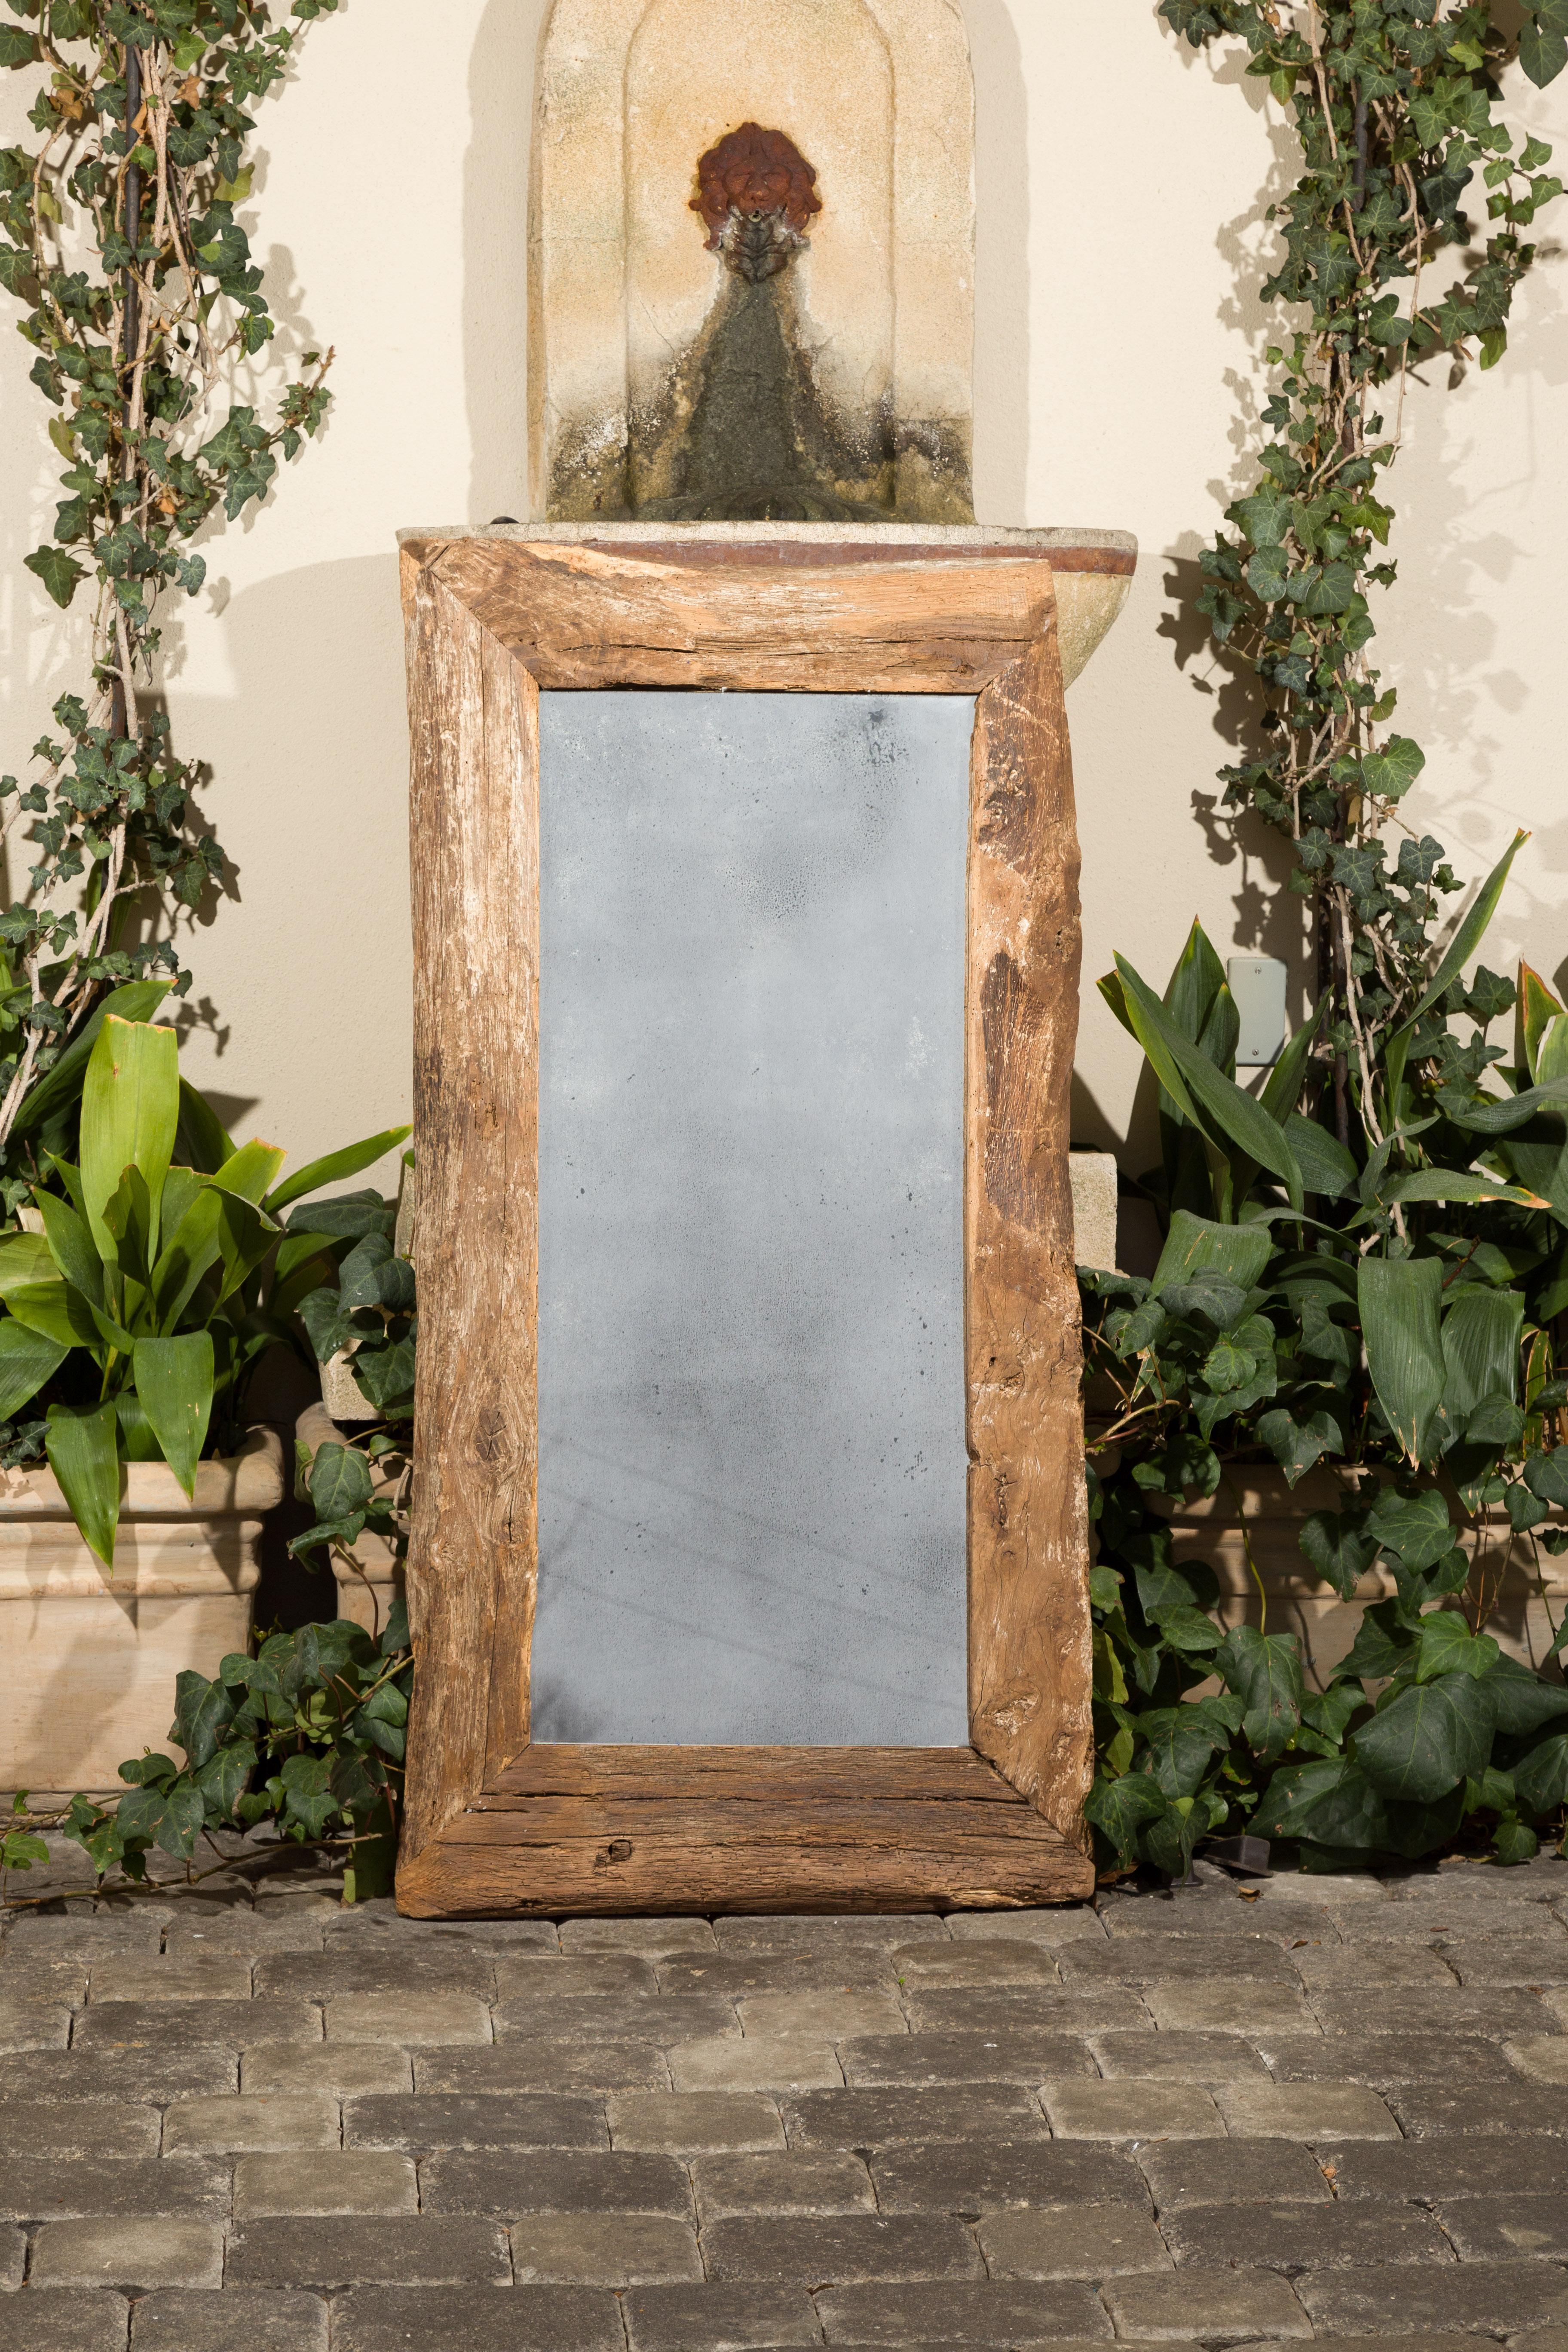 A French rustic mirror made from mid-19th century wood, with antiqued glass. Created in France with wood from the 1850s, this rectangular mirror captures our attention with its rustic silhouette and nicely worn appearance. Showcasing an antiqued